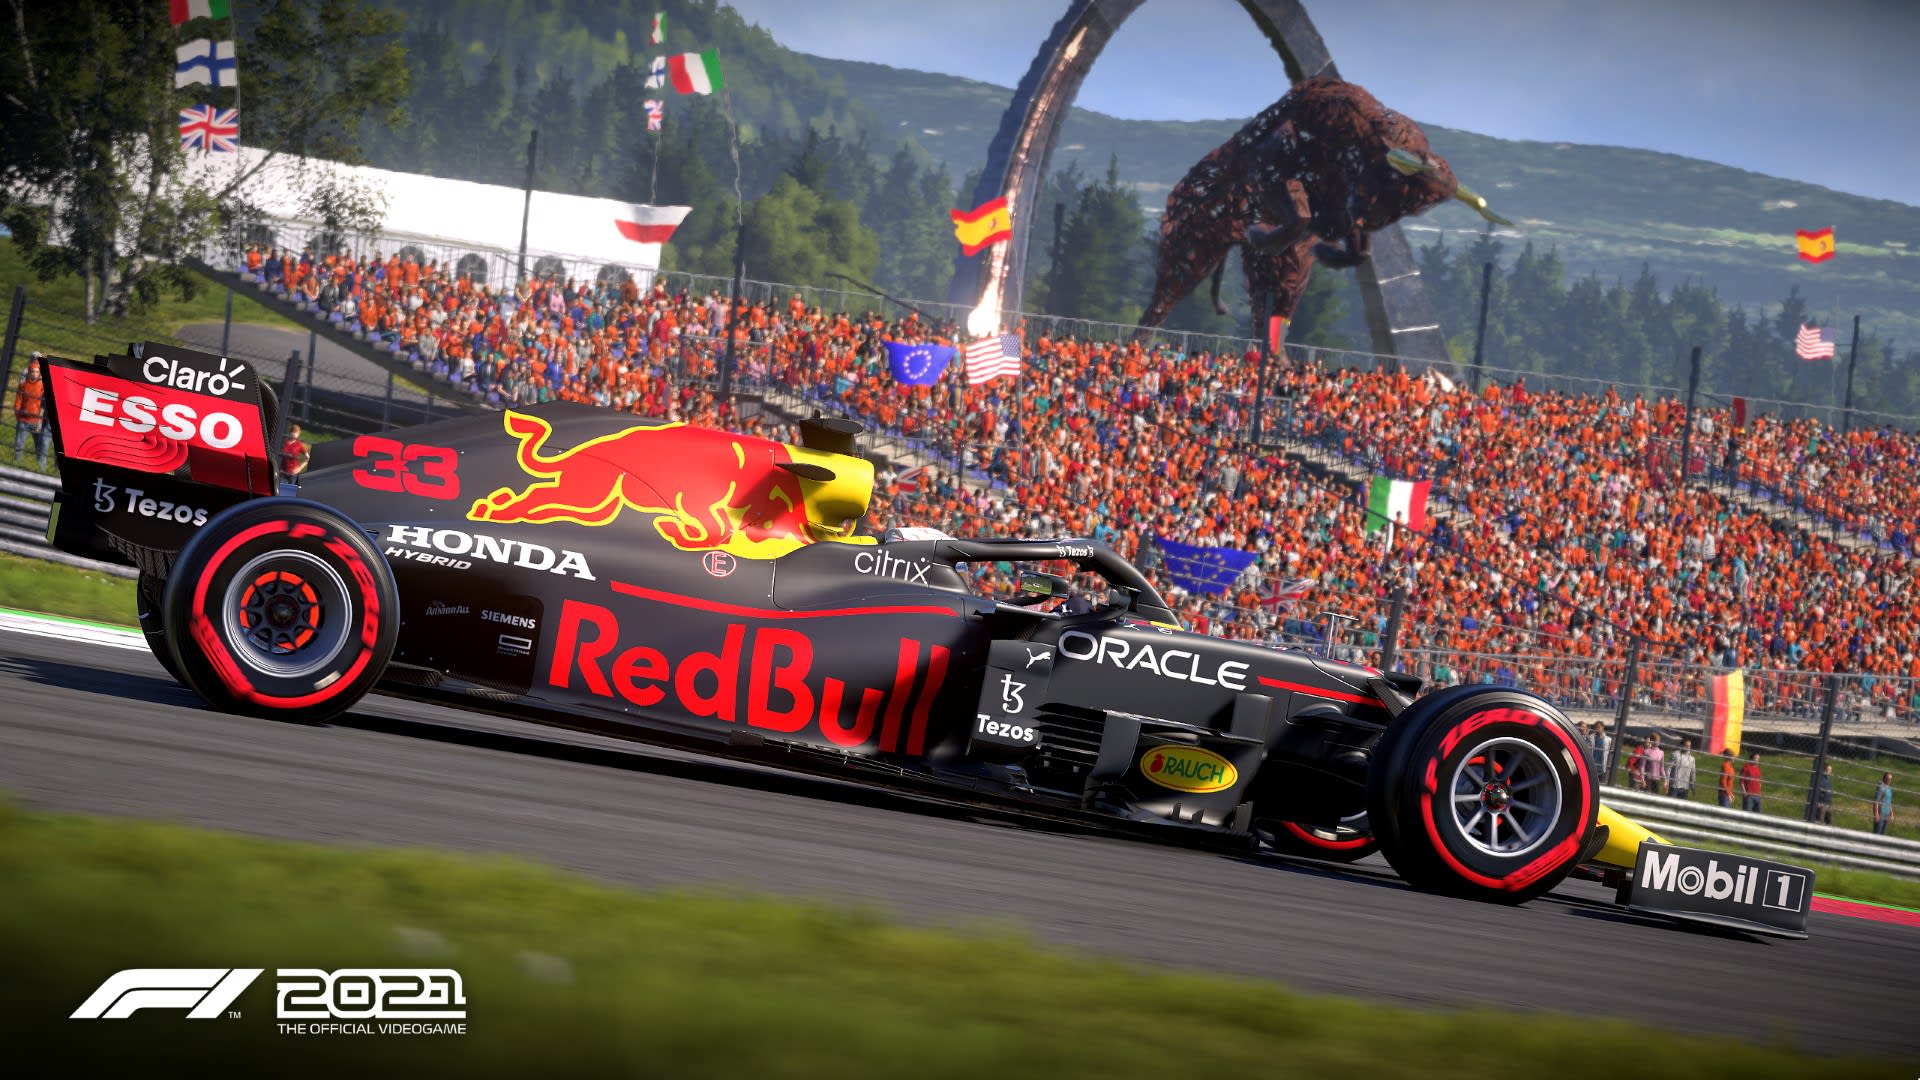 5 Awesome Things About F1 2021